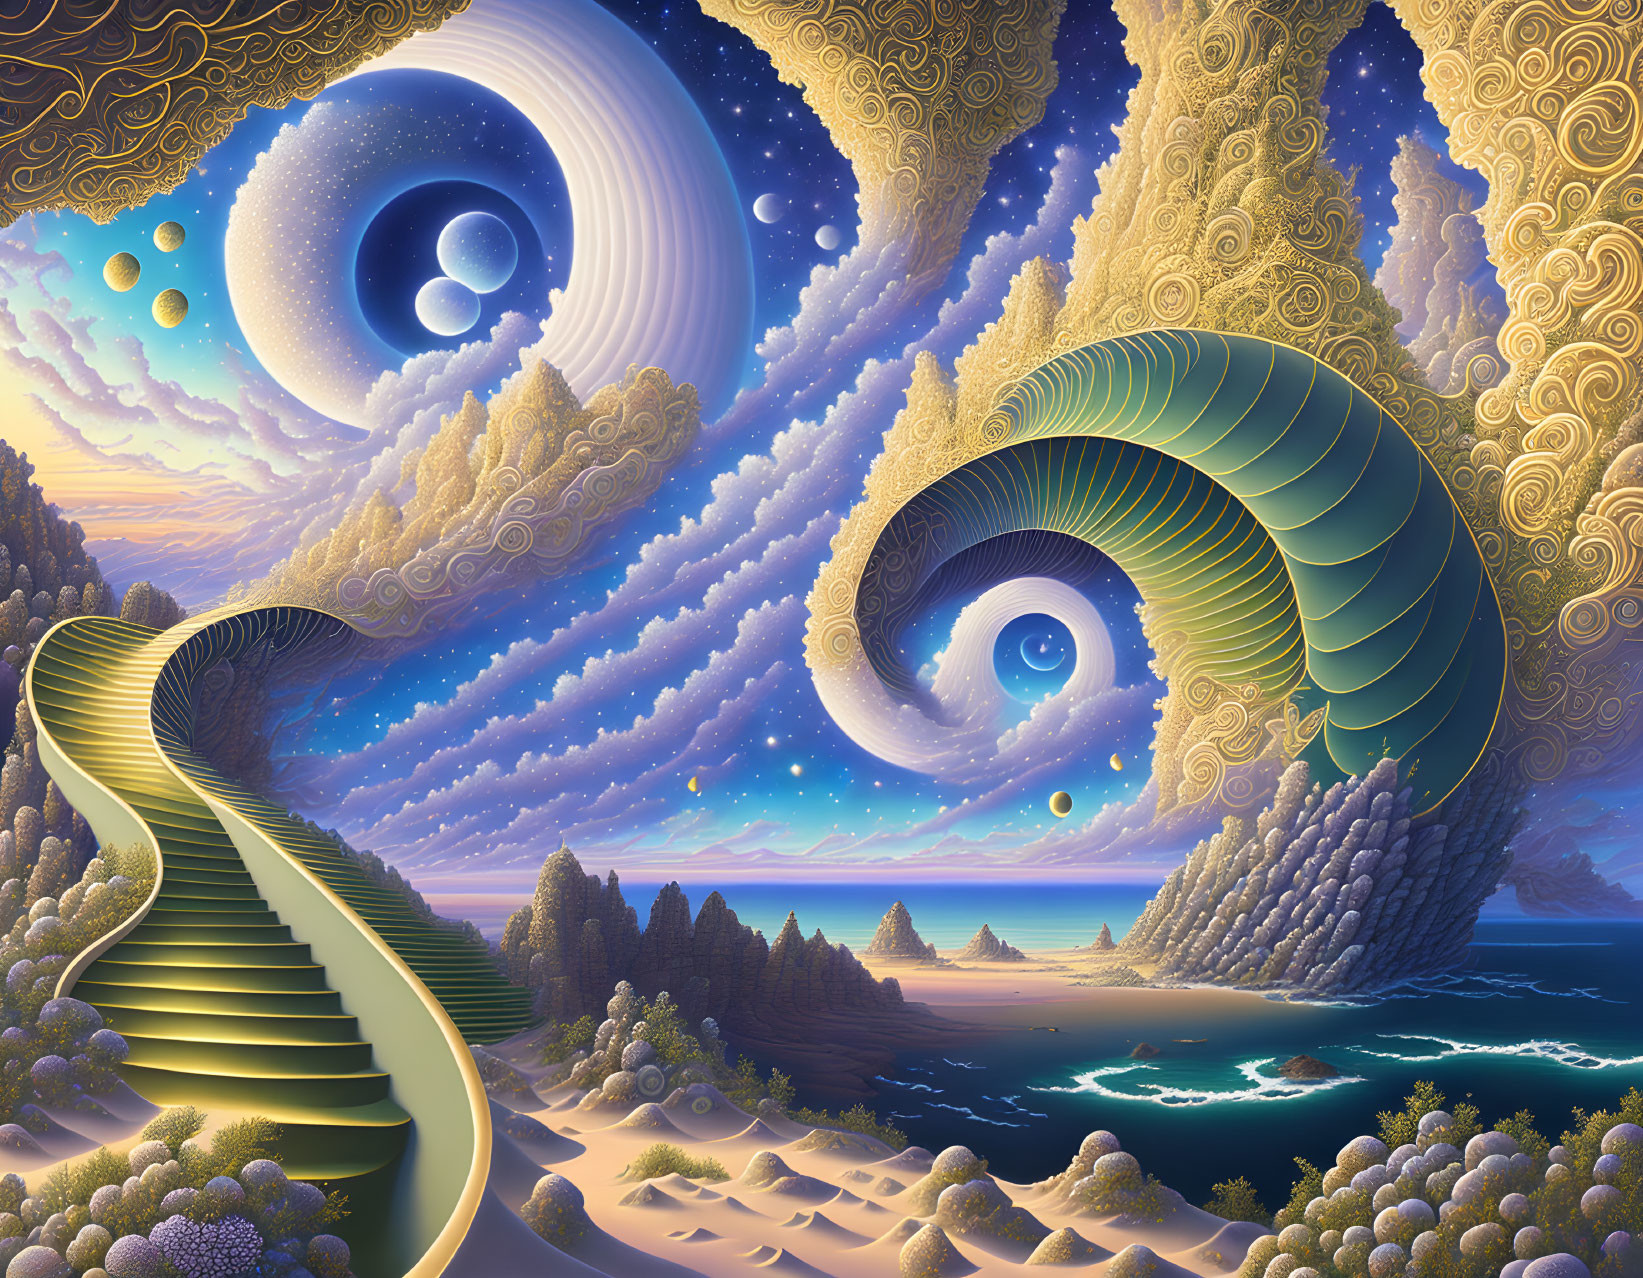 Fantastical landscape with swirling clouds, spiral structures, staircases, and celestial bodies